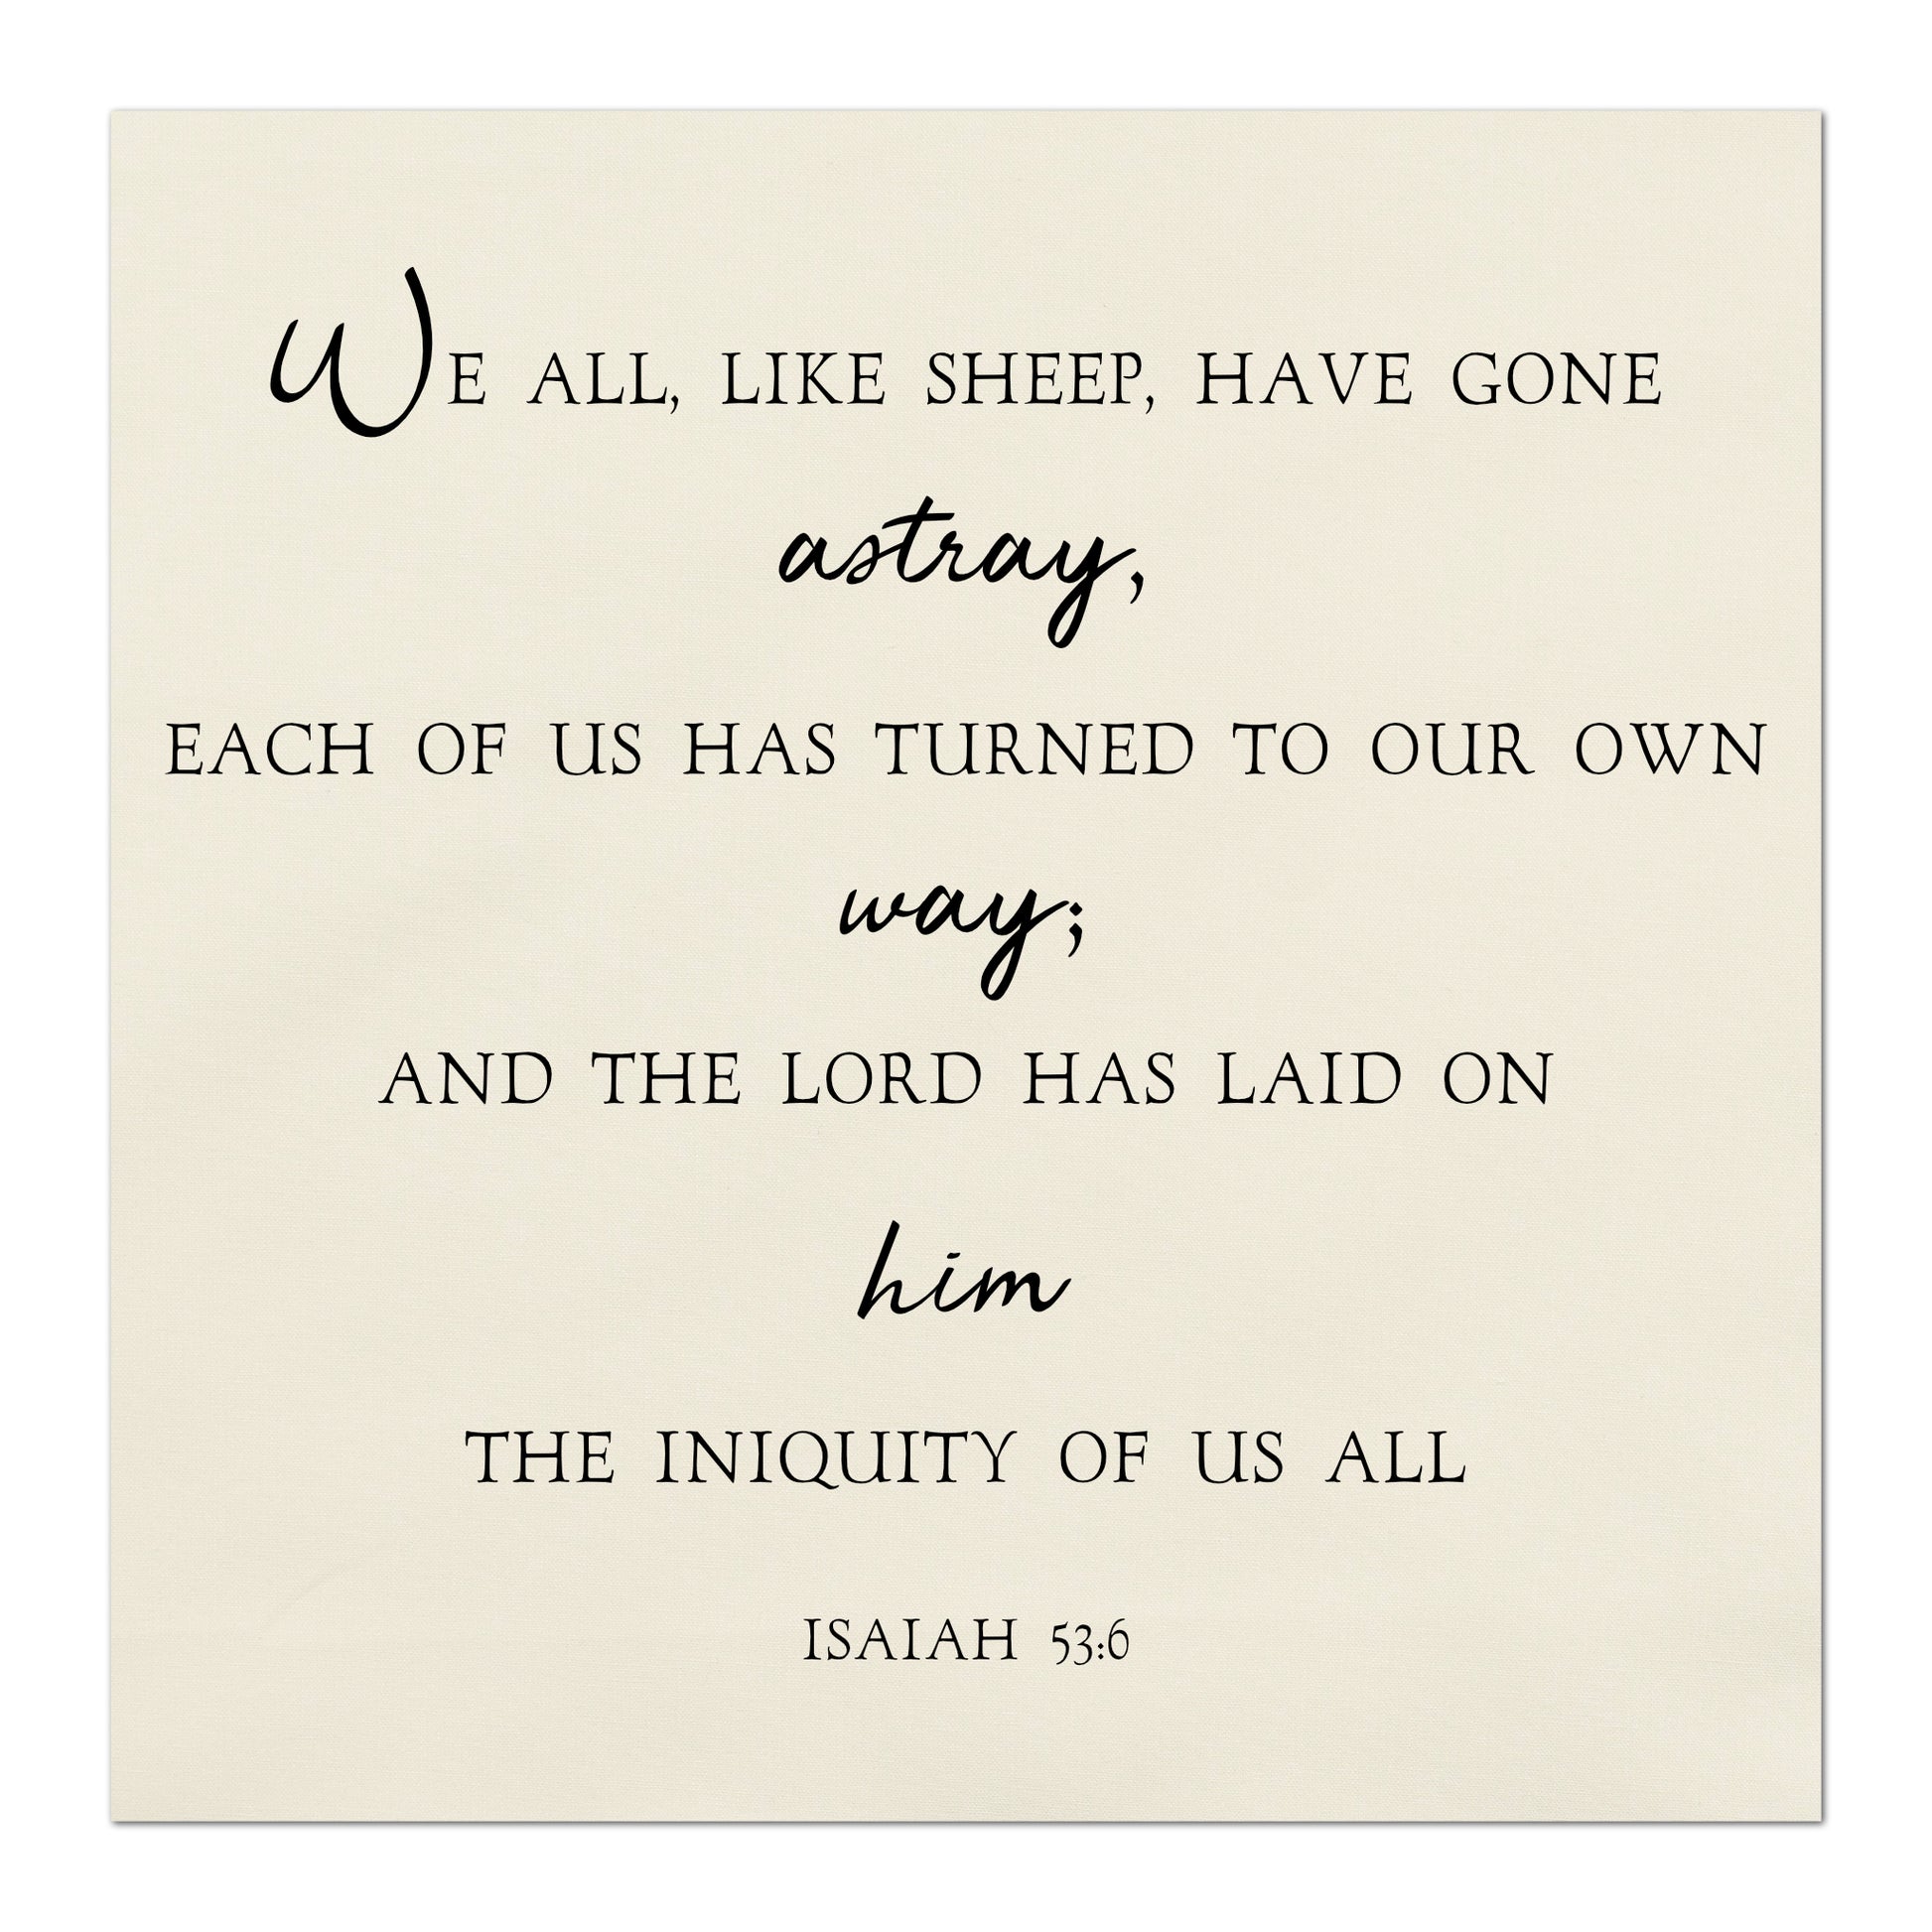 We all, like sheep, have gone astray, each of us has turned to our own way; and the Lord has laid on him the iniquity of us all - Isaiah 53 6. Small Print Quilt Fabric, Wall Art, Quilting Block